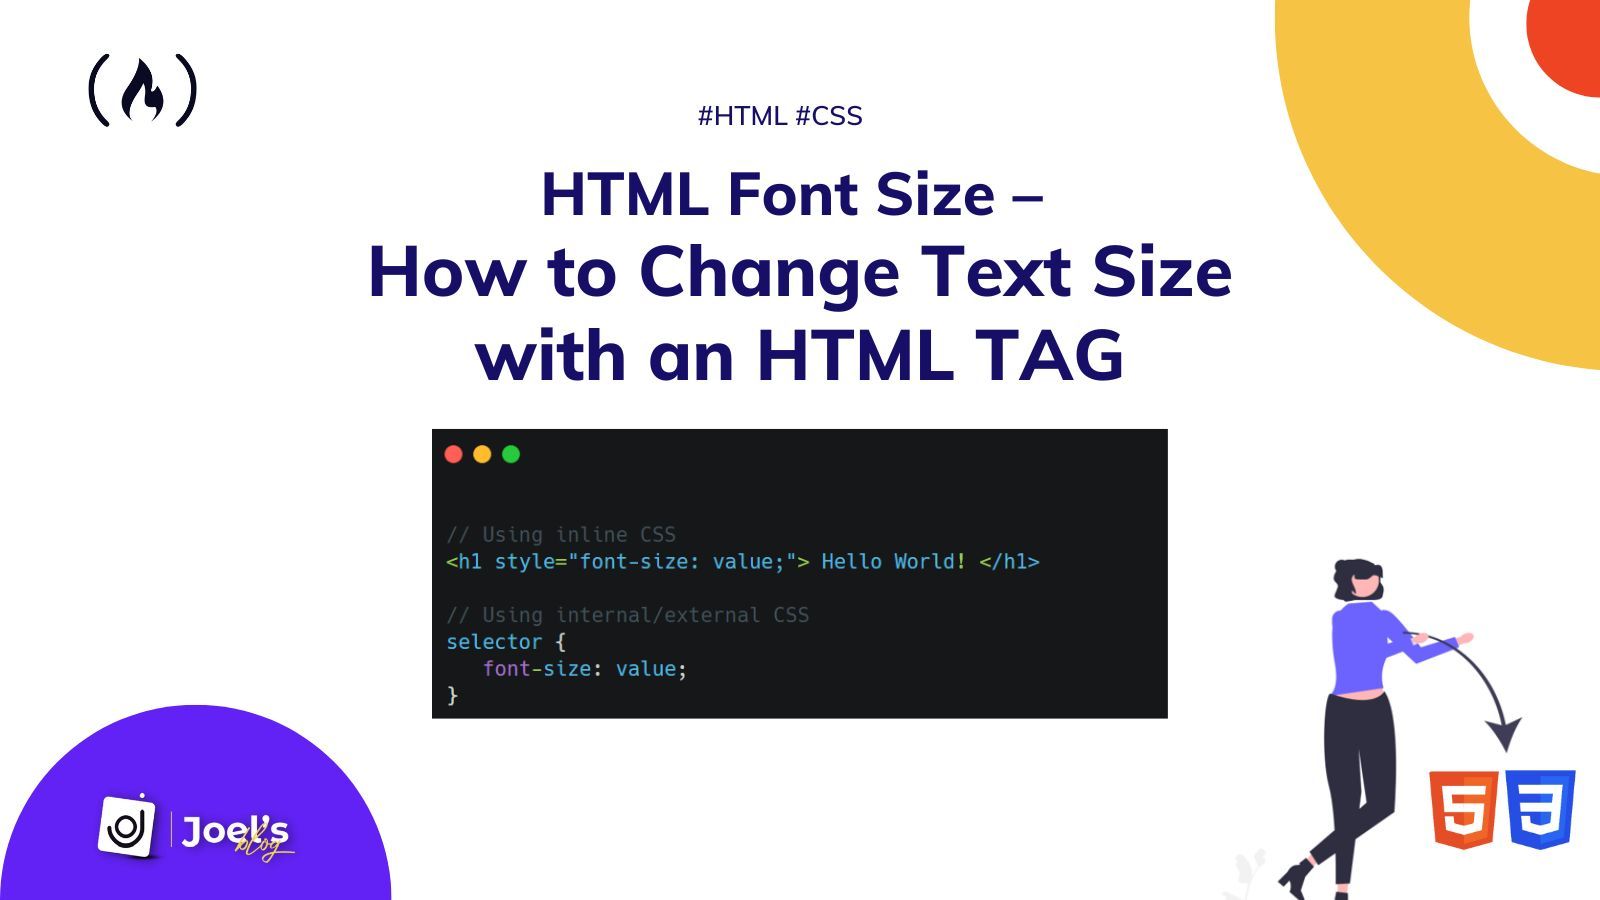 html-font-size-how-to-change-text-size-with-an-html-tag